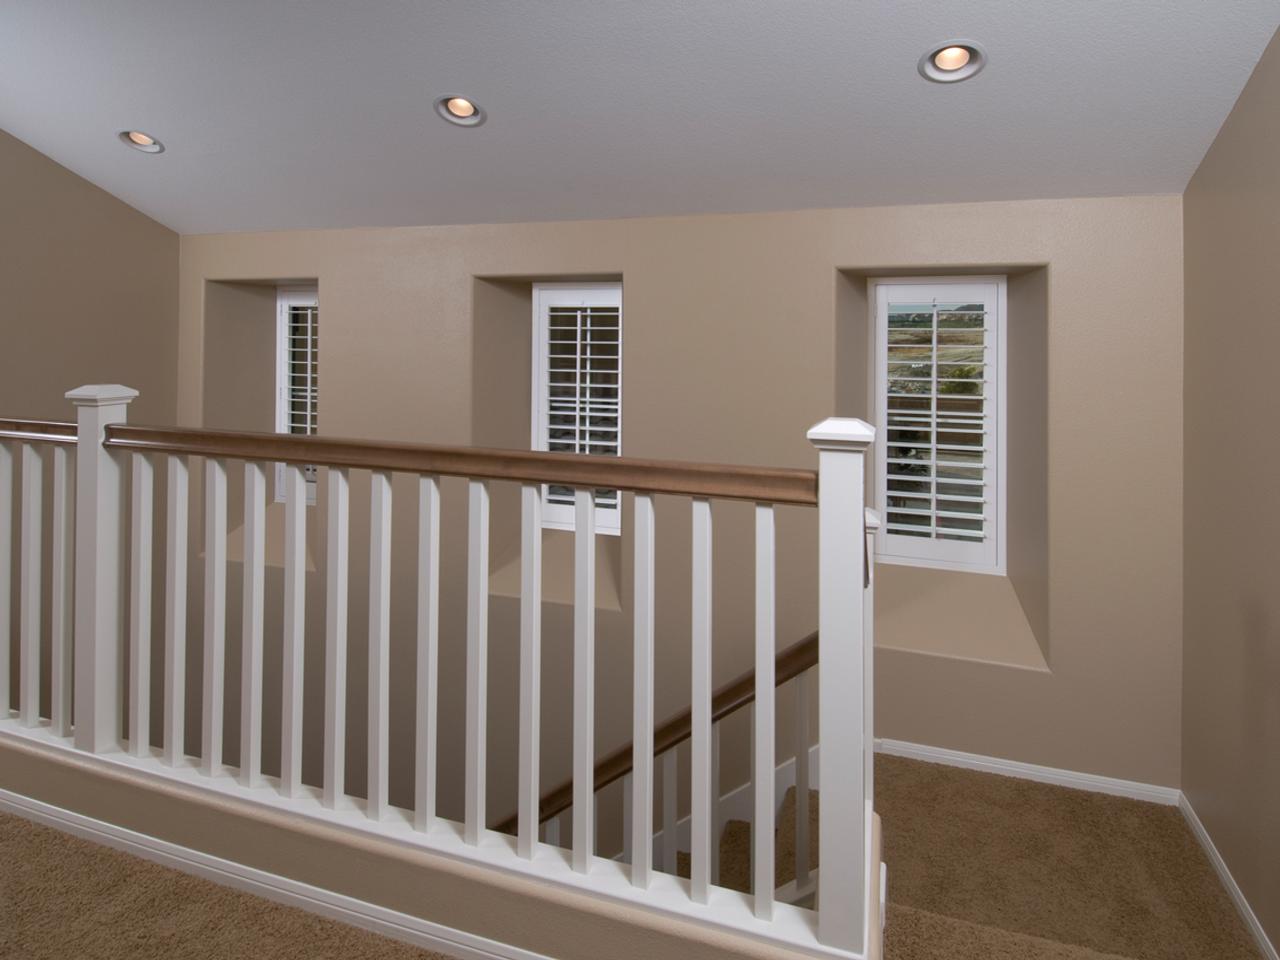 Interior shutters by stairs